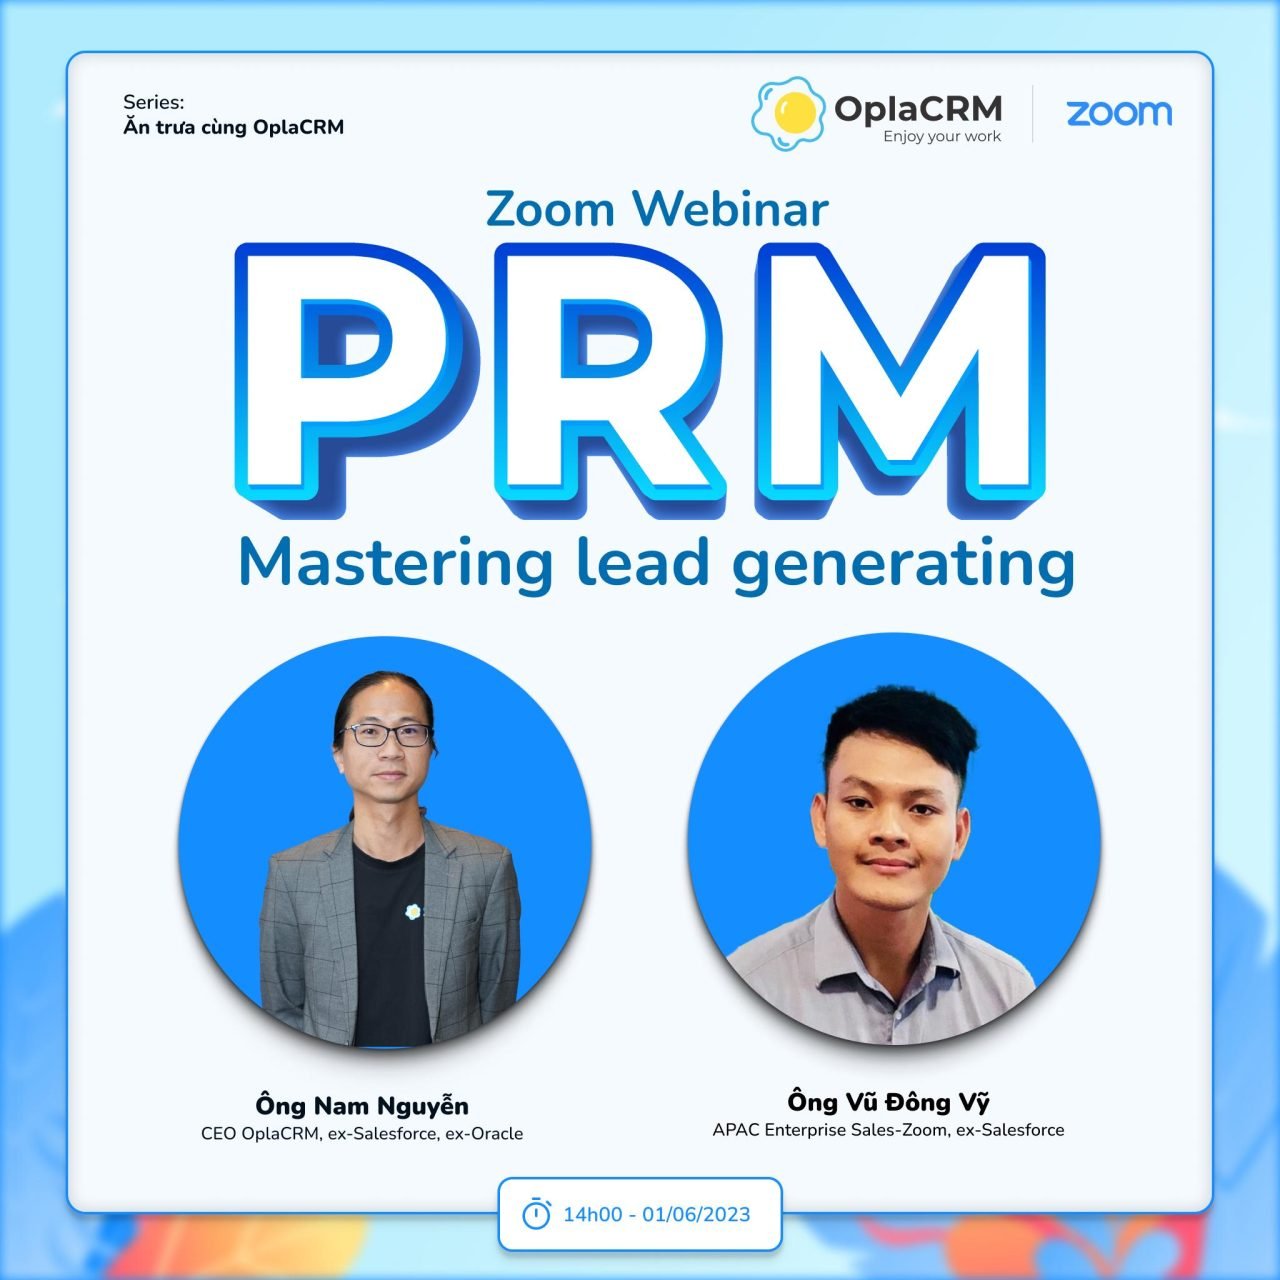 OplaCRM mastering lead generating